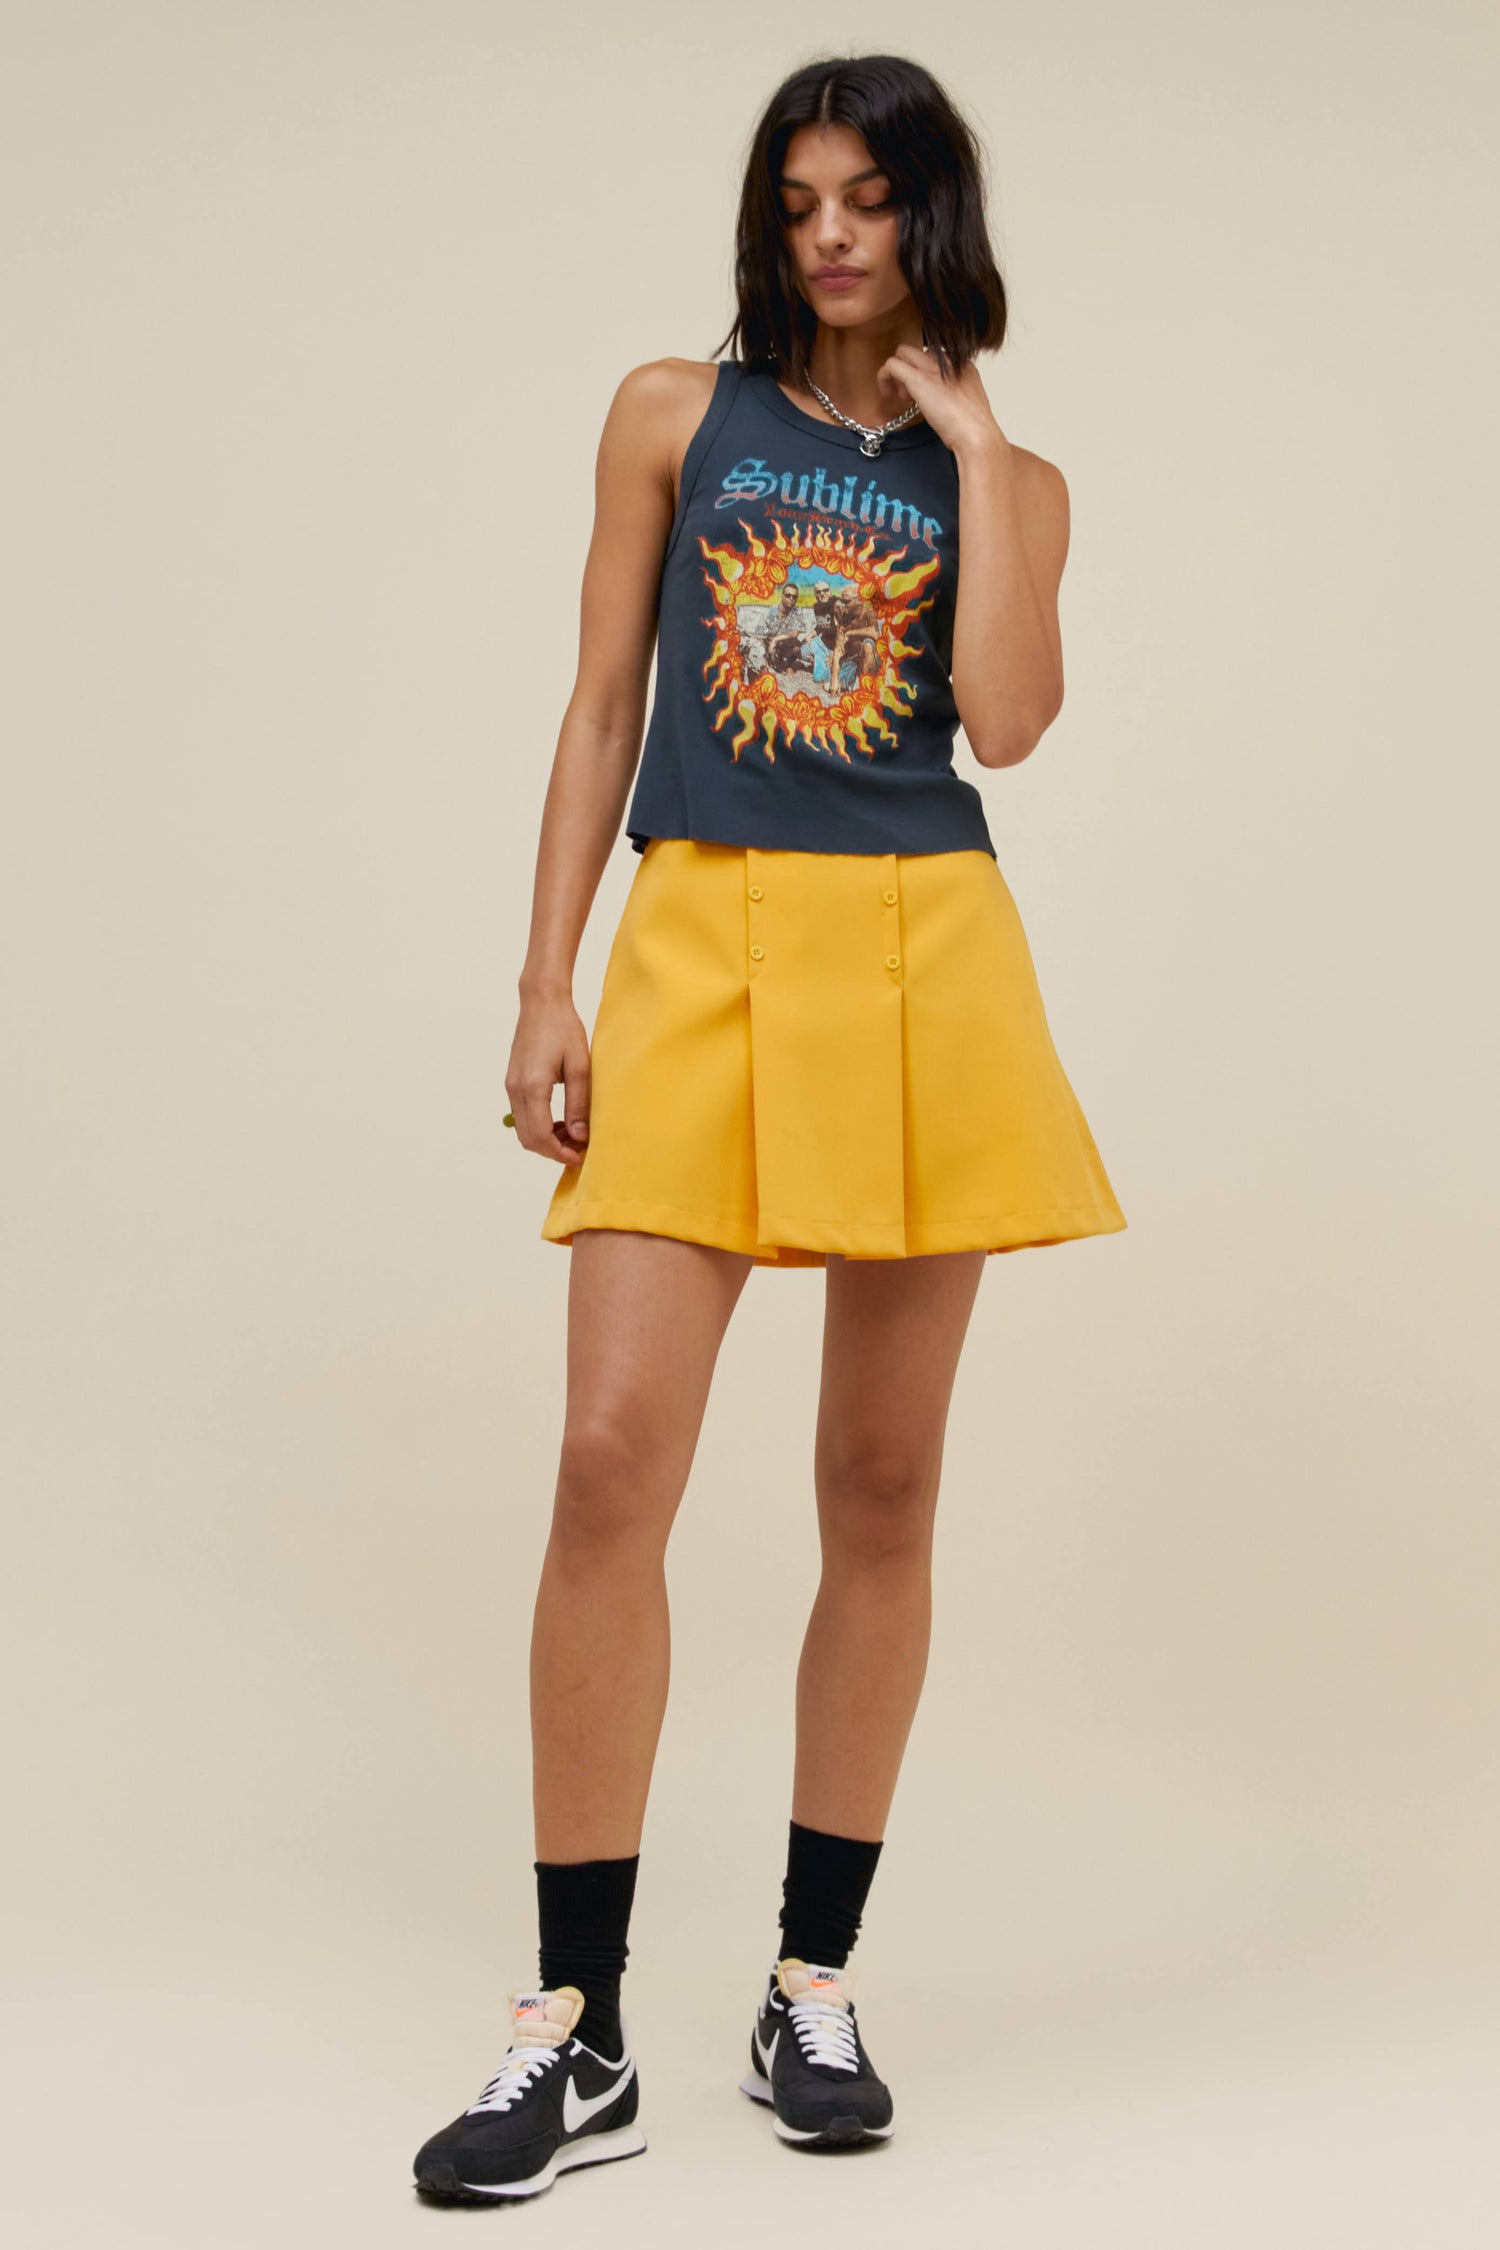 yellow mini skirt with Sublime tank